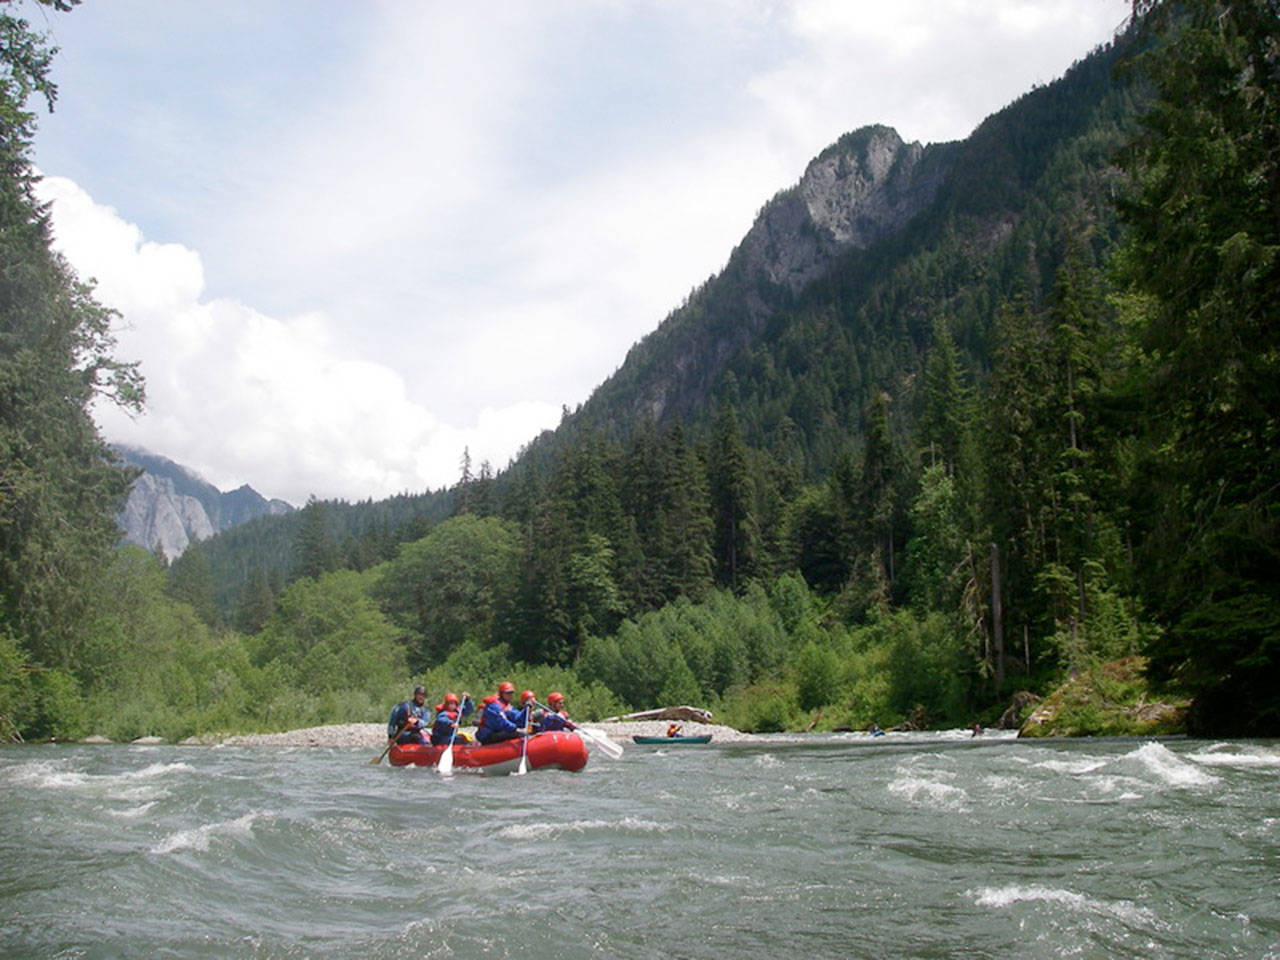 Access to the Middle Fork of the Snoqualmie River will be improved as part of a partnership between North Bend, King County, and the Department of Natural Resources. Photo Courtesy of the Department of Natural Resources.